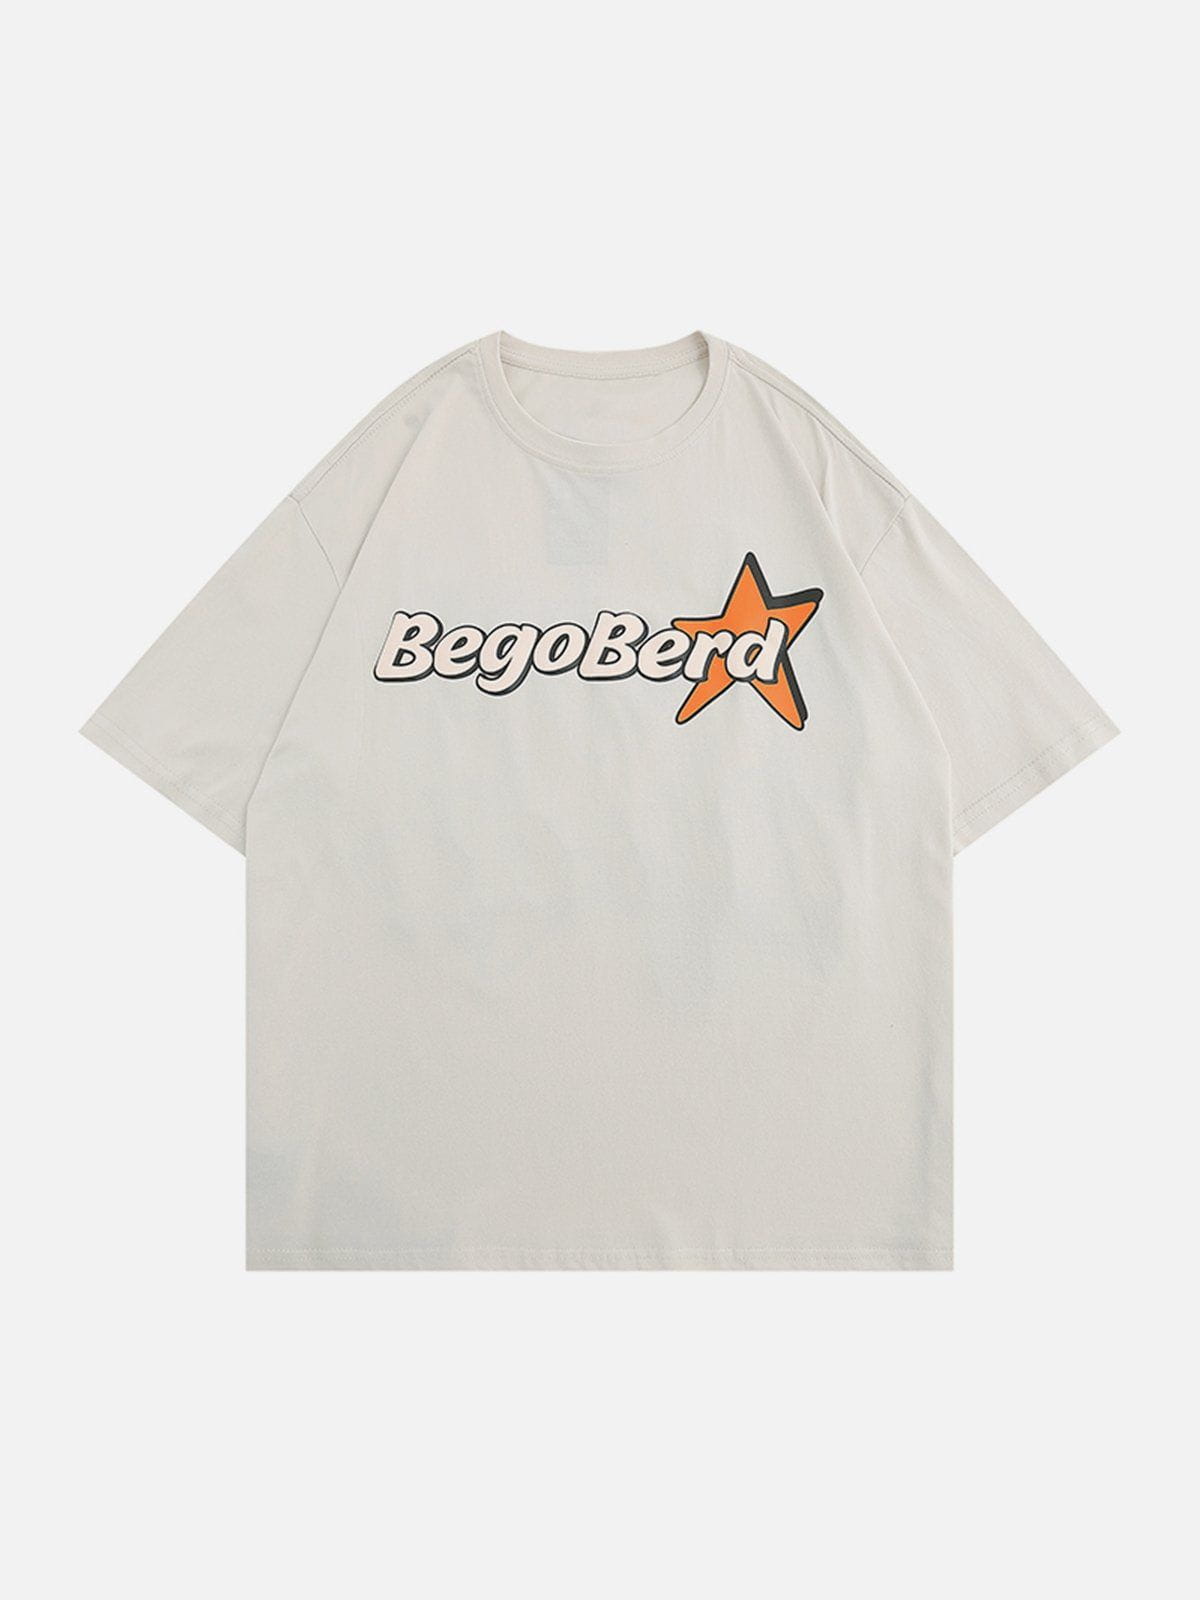 Sneakerland™ - Star Letter Graphic Tee